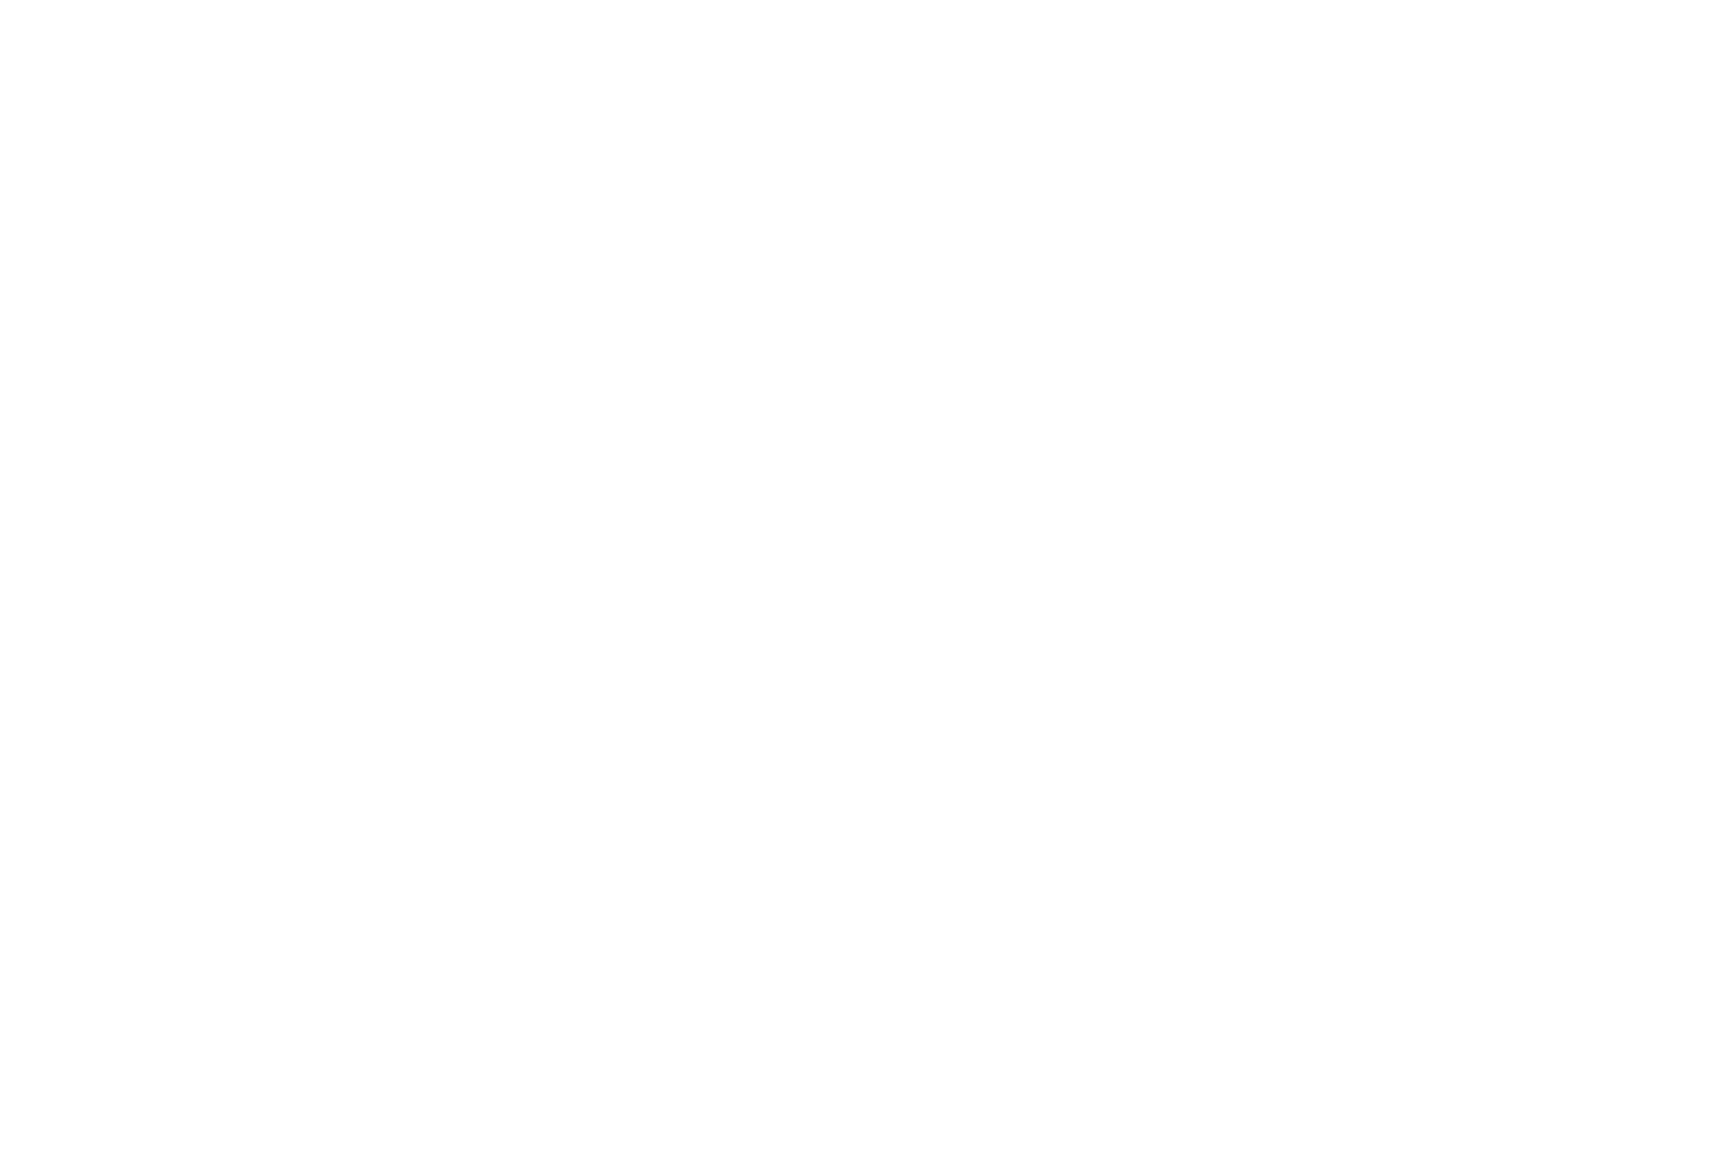 NOMINATED  - BEST DIRECTOR  - HANG ONTO YOUR SHORTS 2017.png